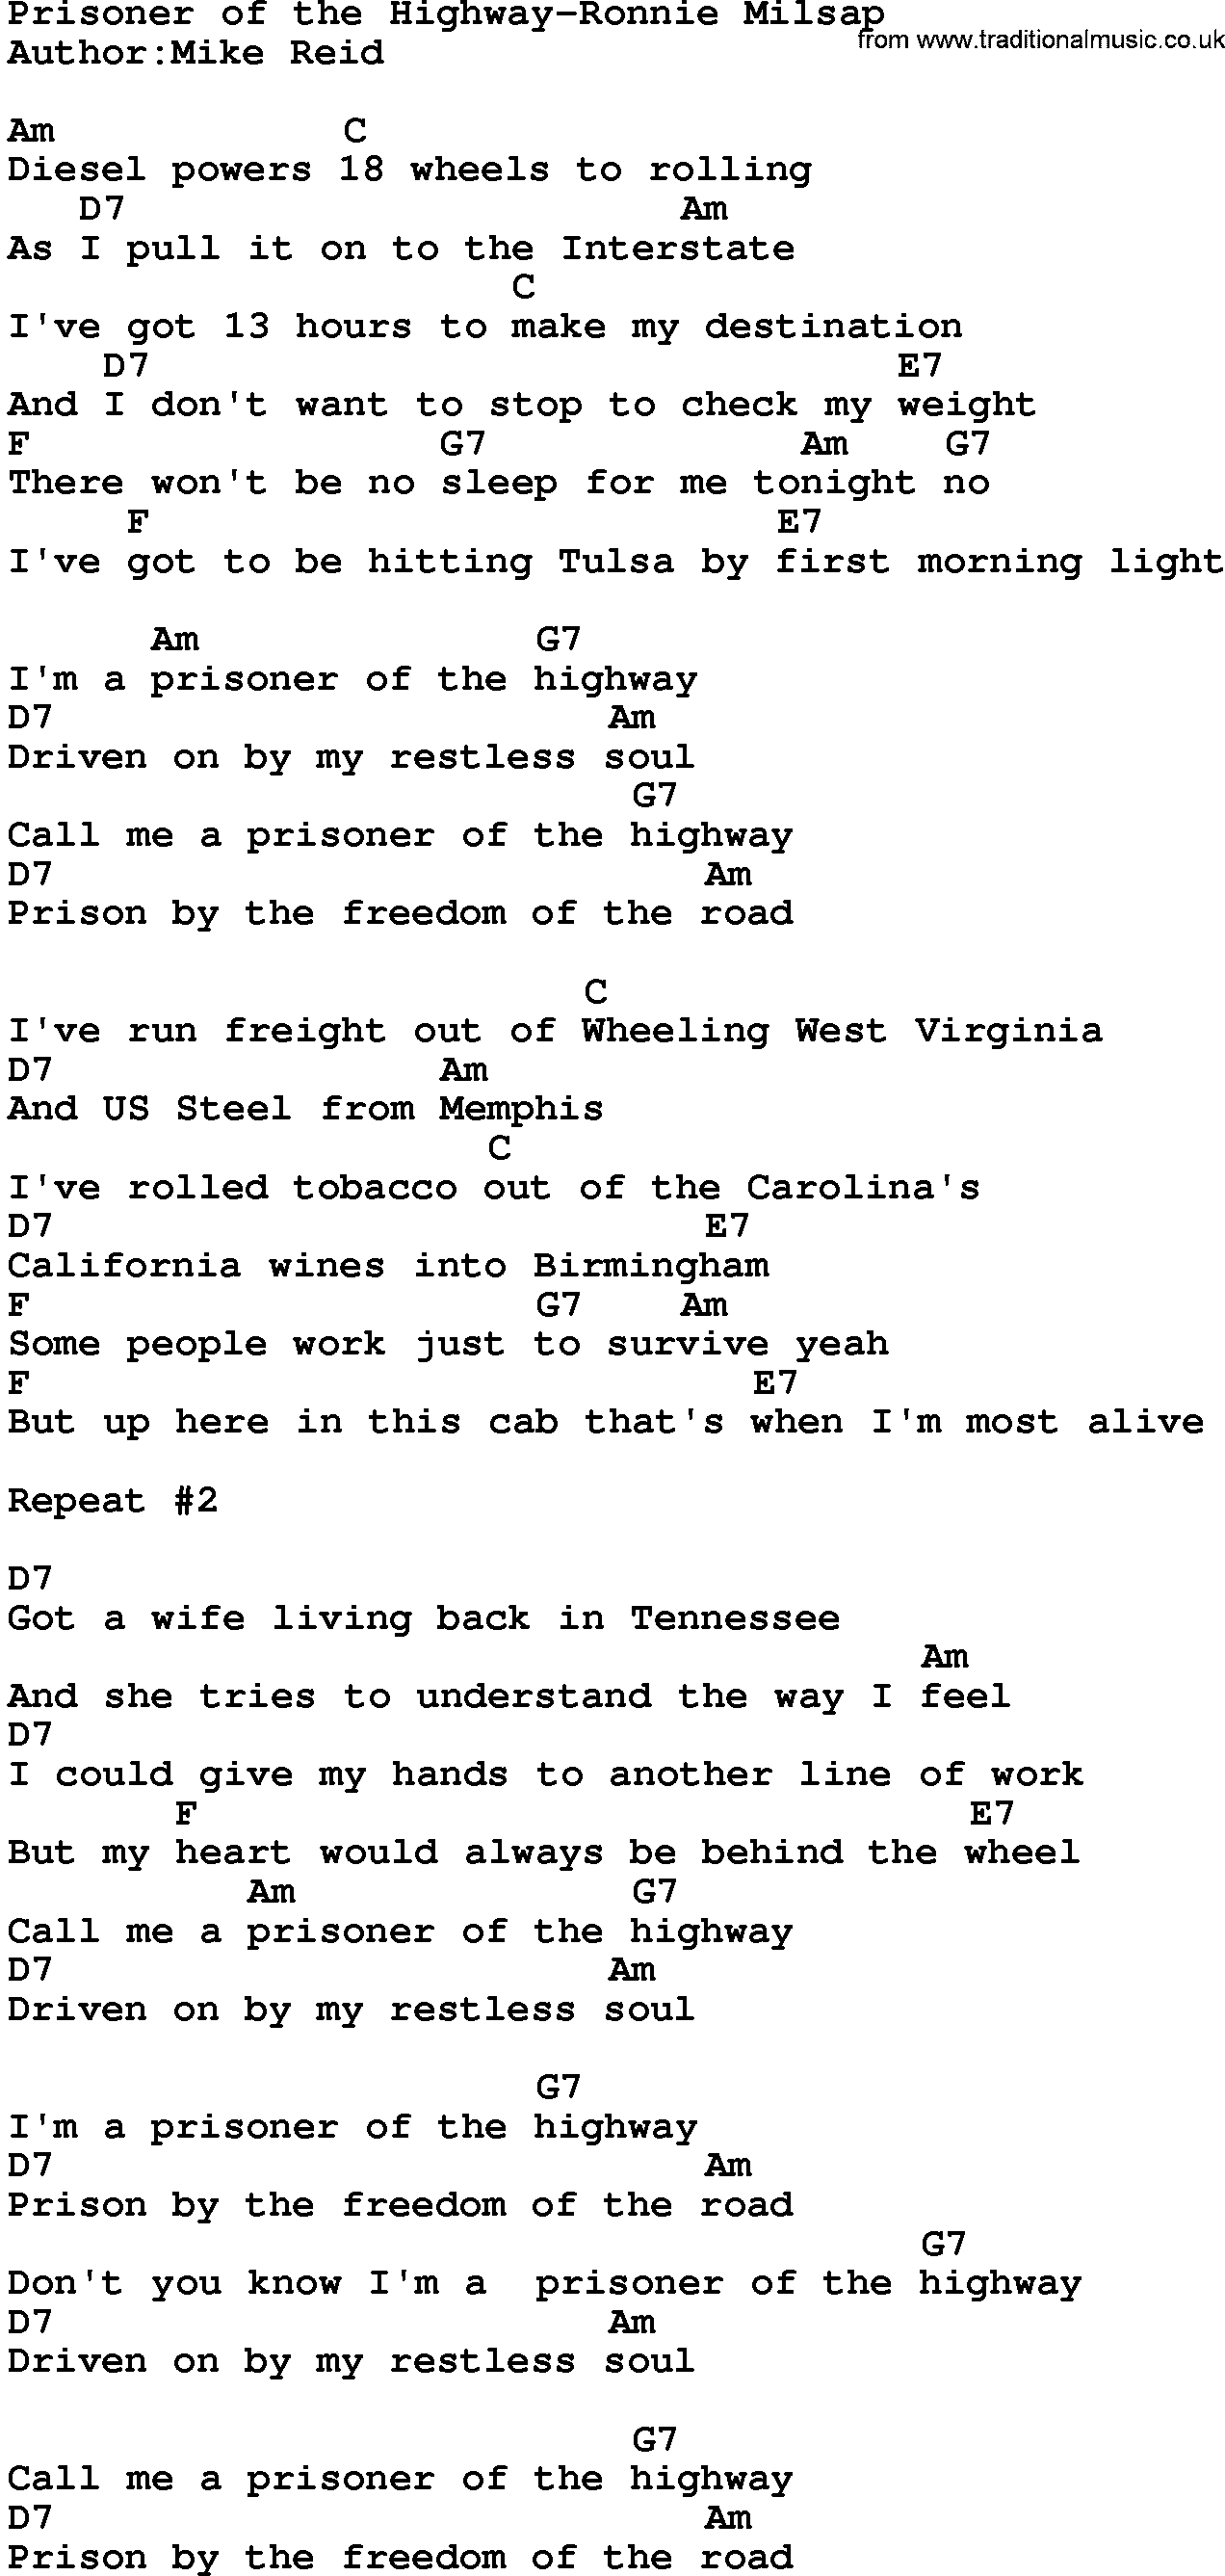 Country music song: Prisoner Of The Highway-Ronnie Milsap lyrics and chords